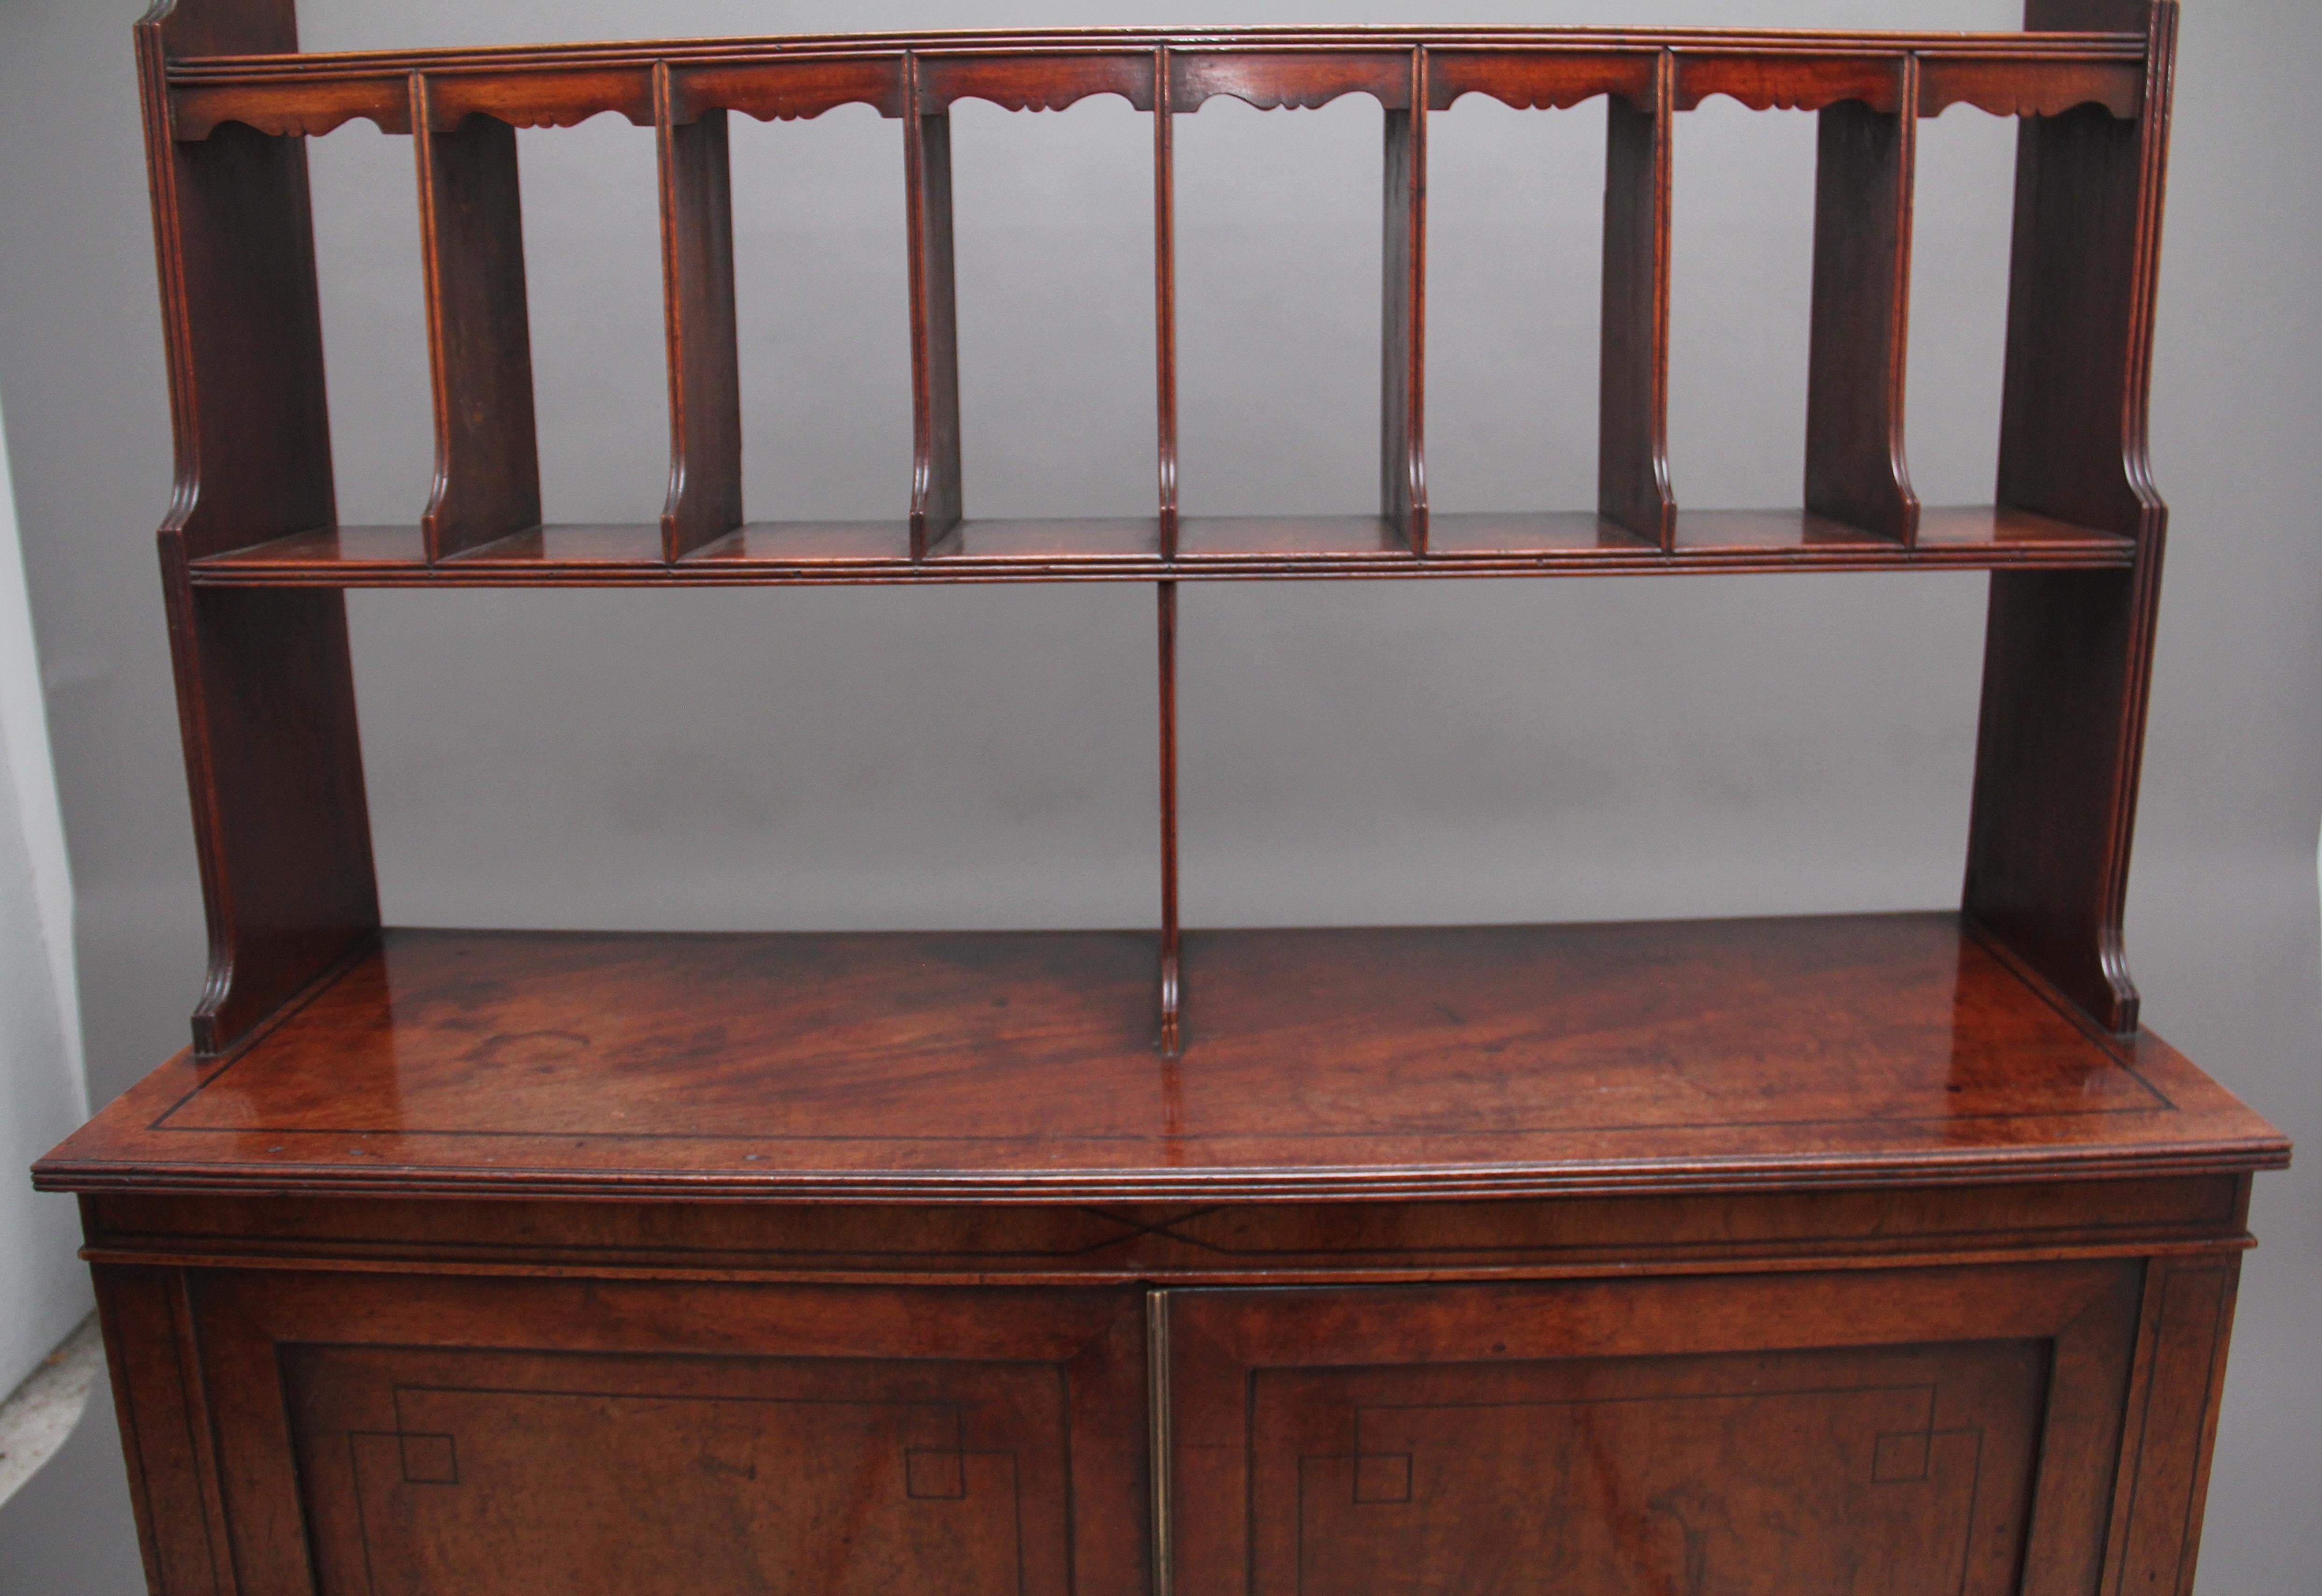 Early 19th Century Mahogany Open Top Cabinet In Good Condition For Sale In Martlesham, GB